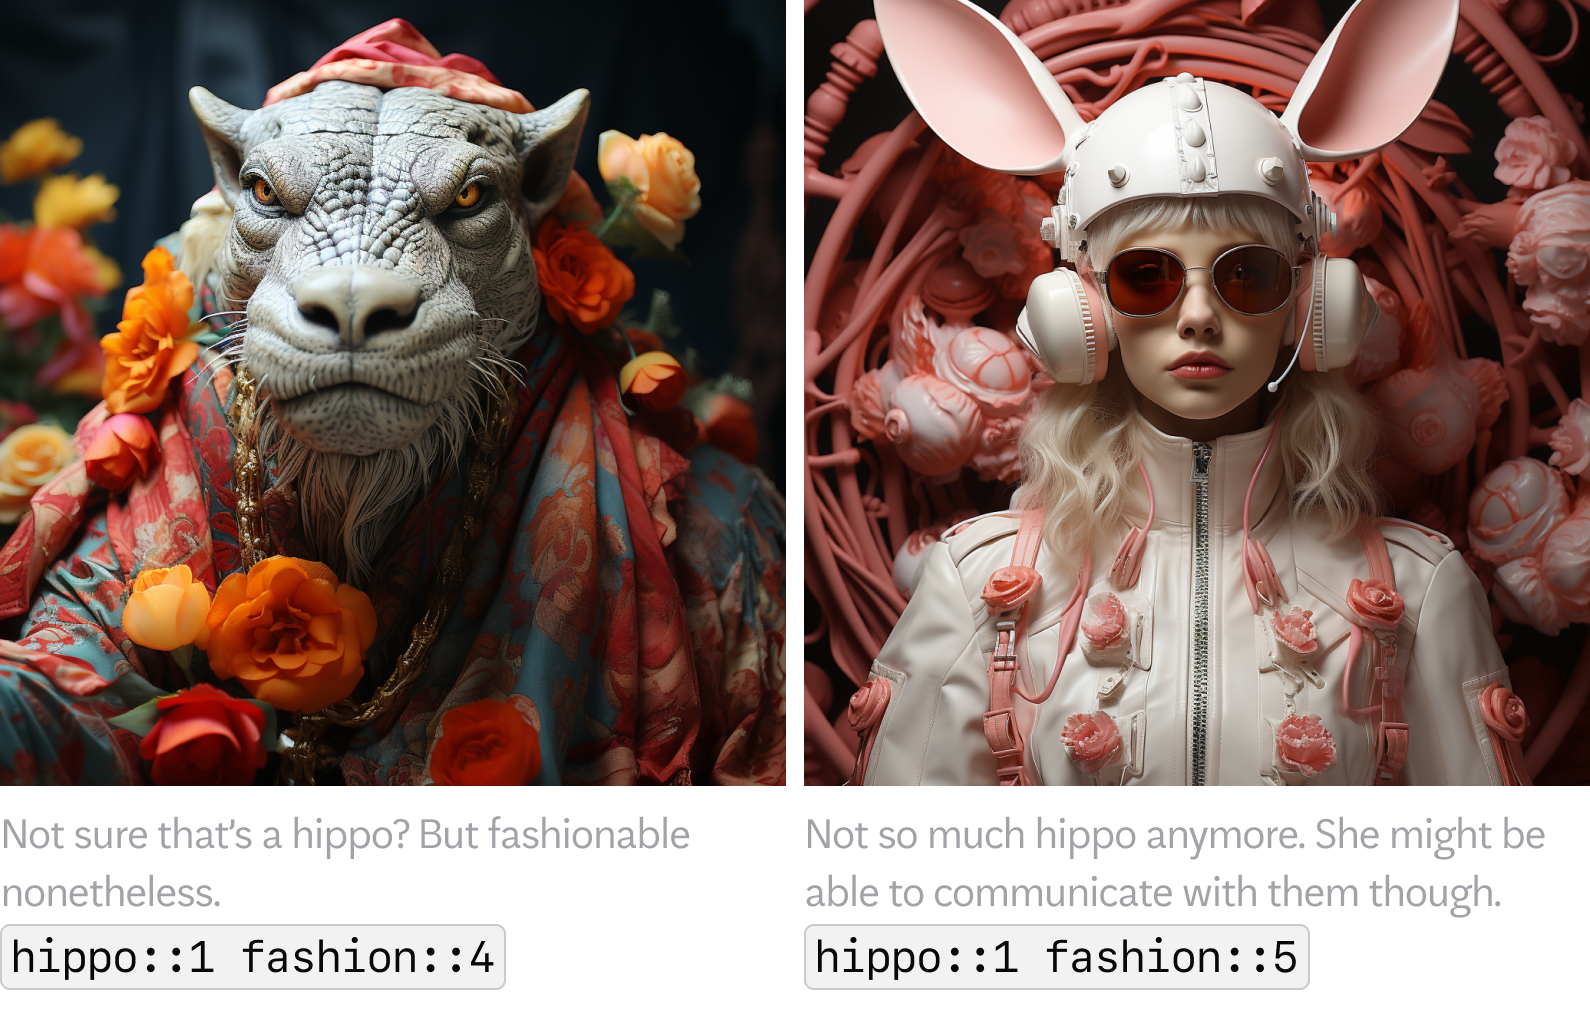 AI-generated image of fashion characters wearing flowers and costumes